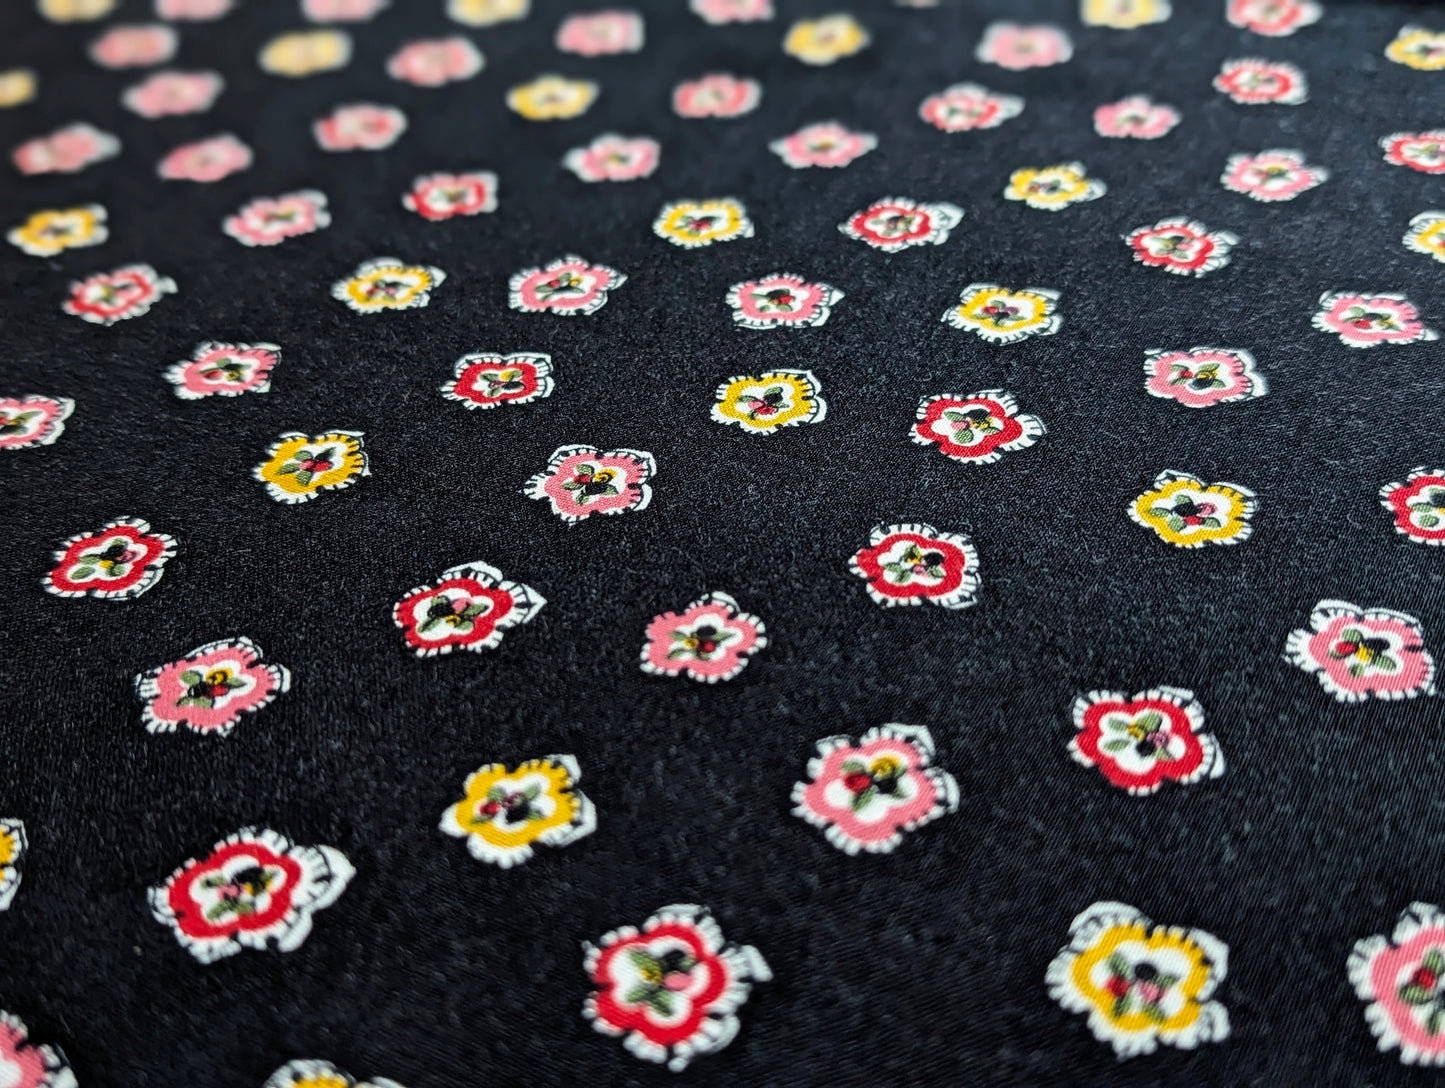 Vintage Fabric - MCM Flowers on Black Background Cotton by Hamil Textiles